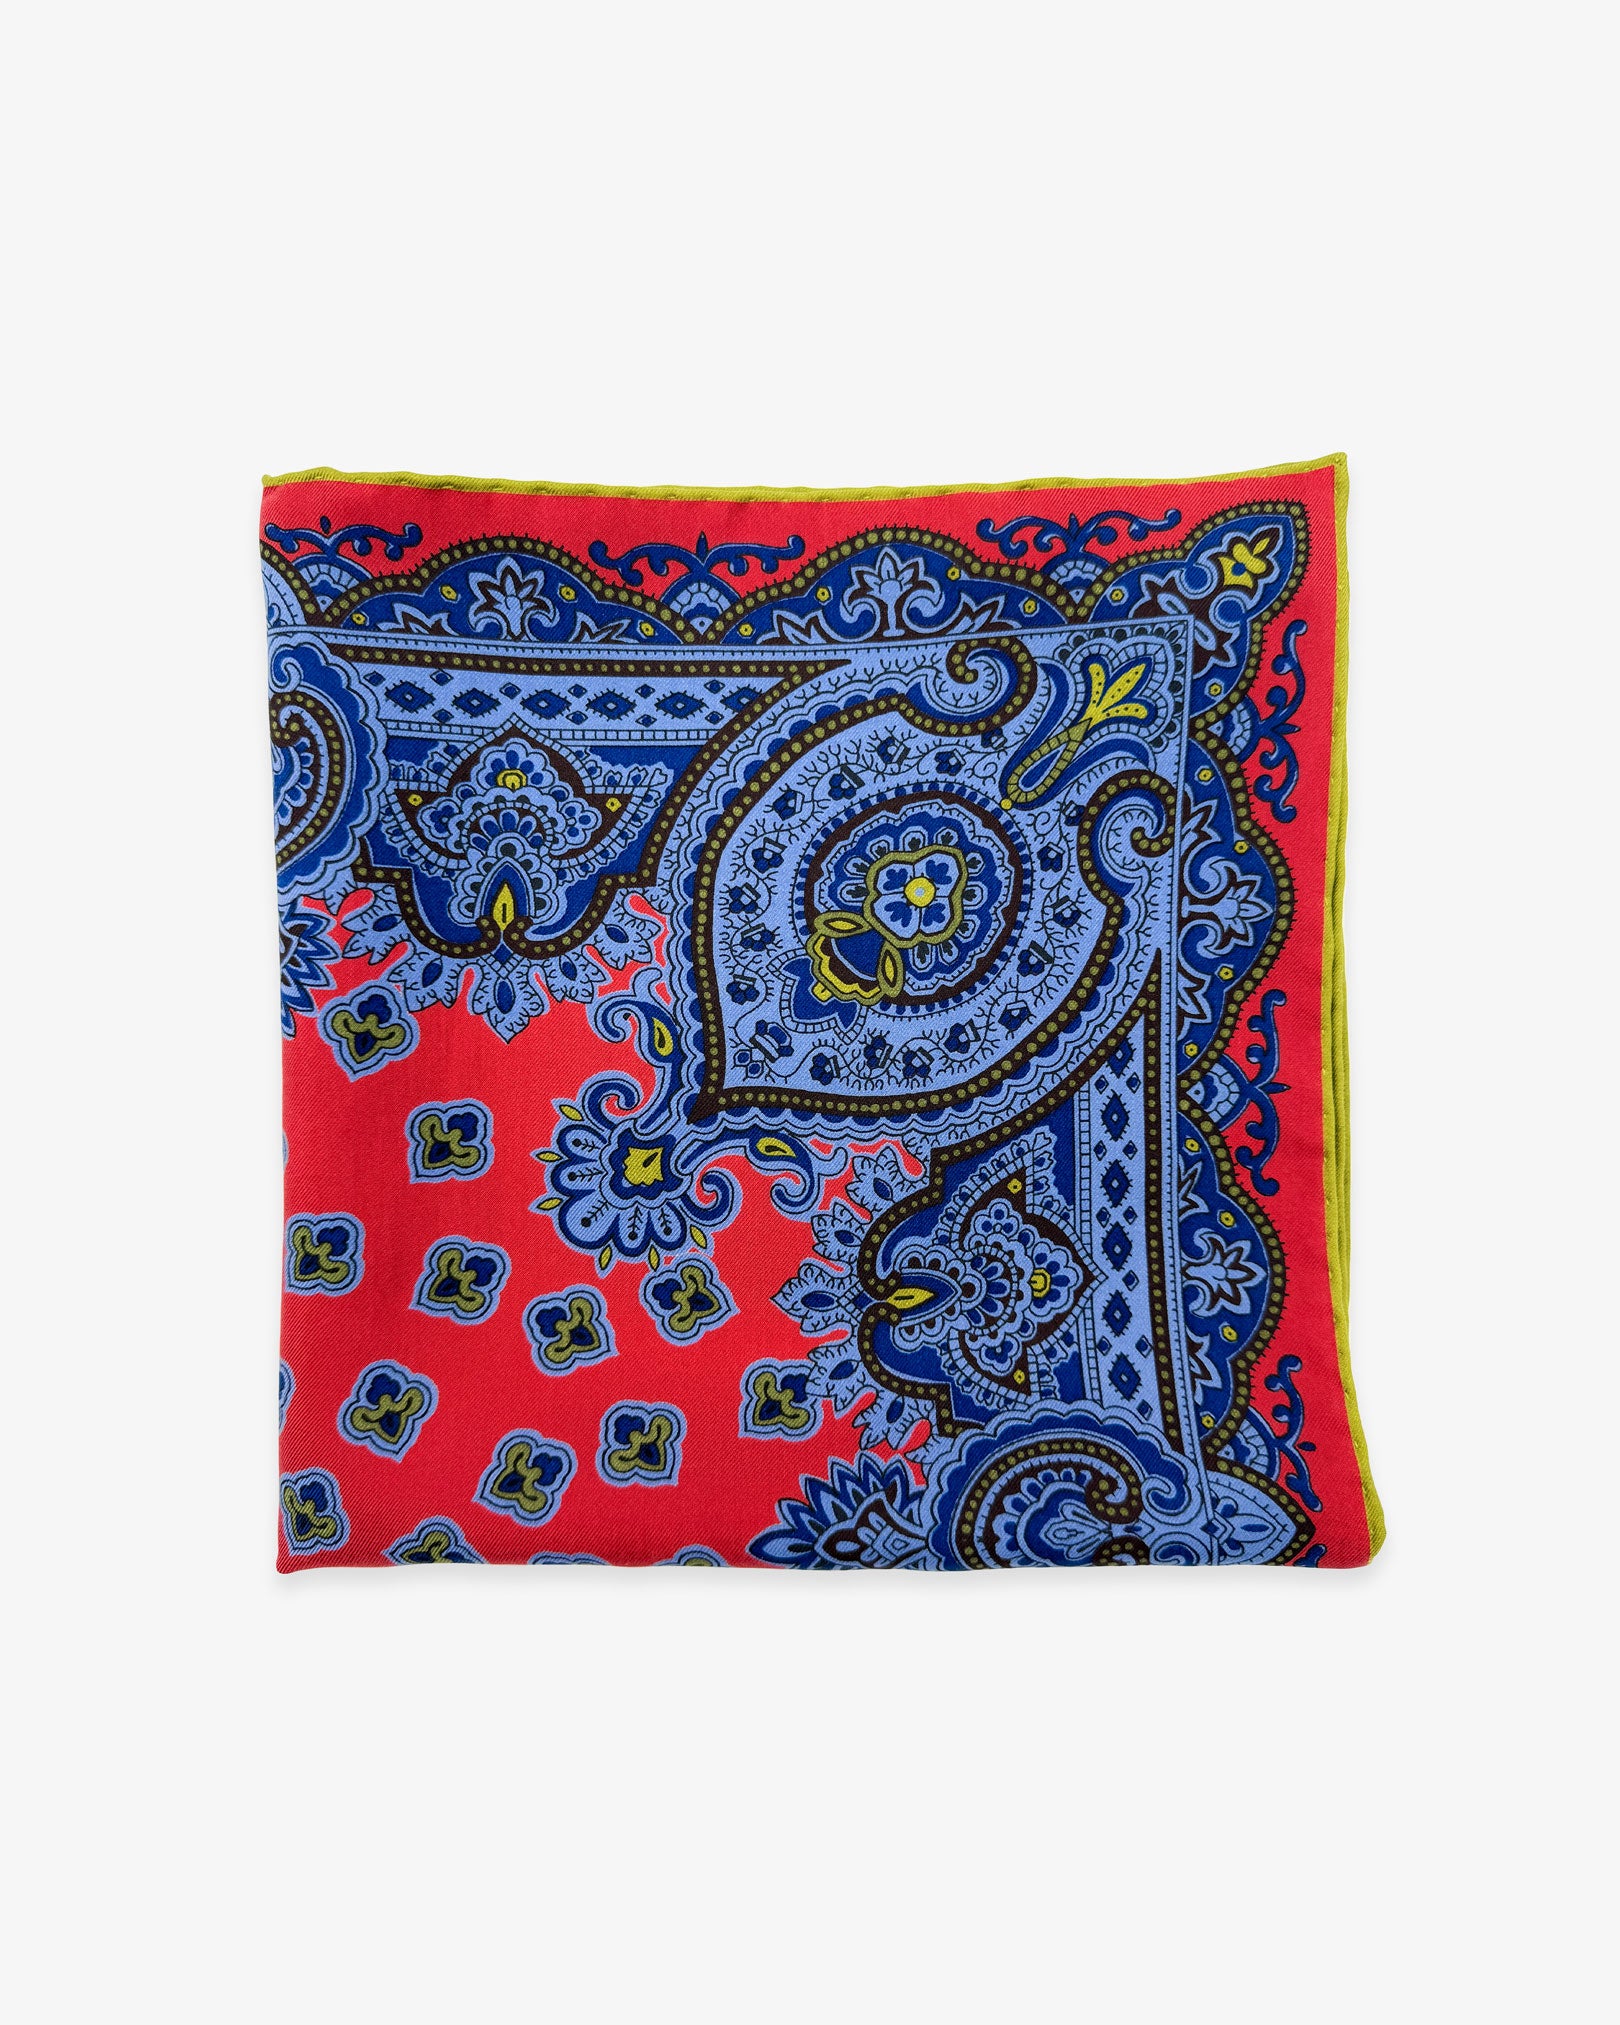 The 'Aldborough' pocket square from SOHO Scarves Madder silk collection. Folded into a quarter, showing the various traditional stylised forms in blue and red.